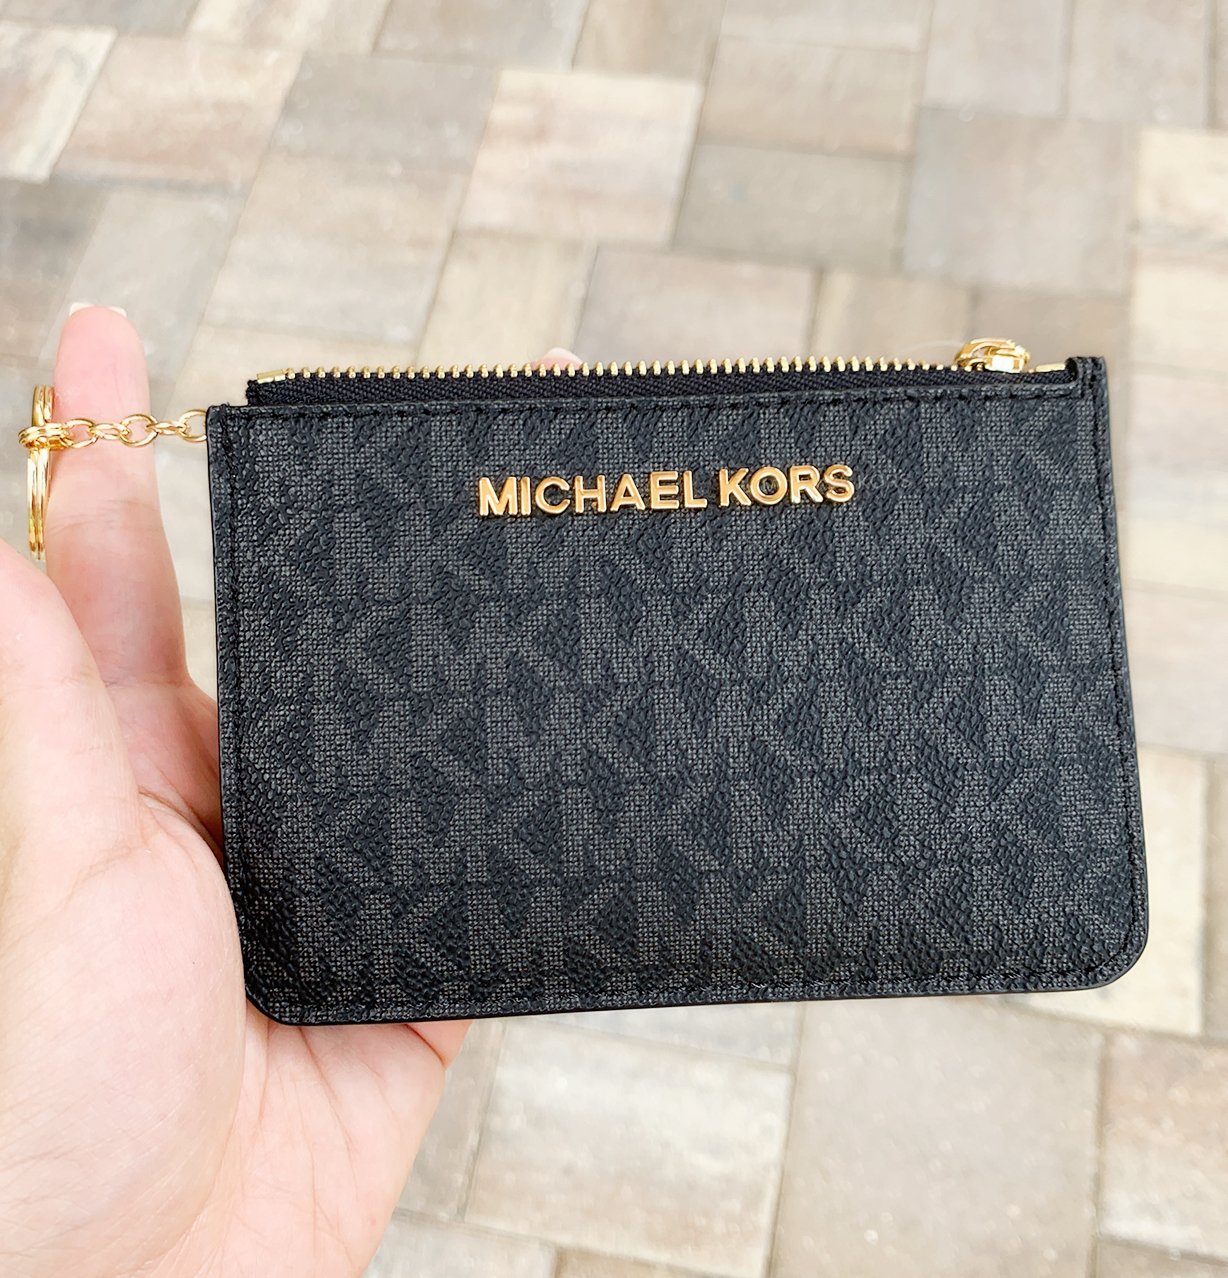 Black Coin Purse Michael Kors - NY Outlet Brands in Dubai